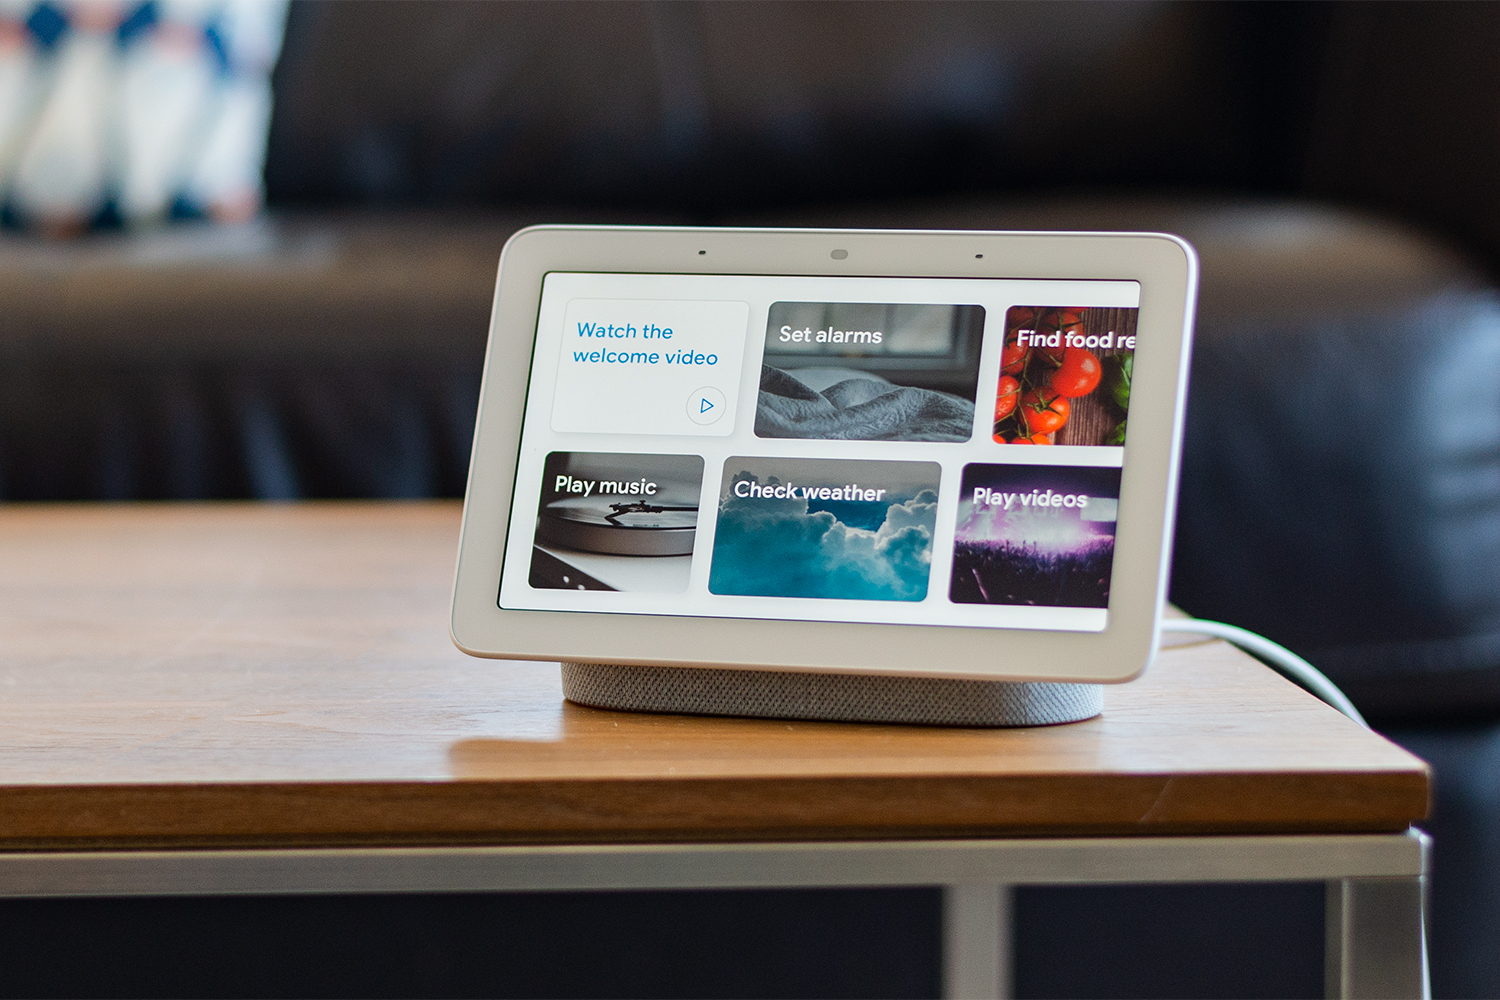 Google Nest Hub Review: Small, Simple, and Smart